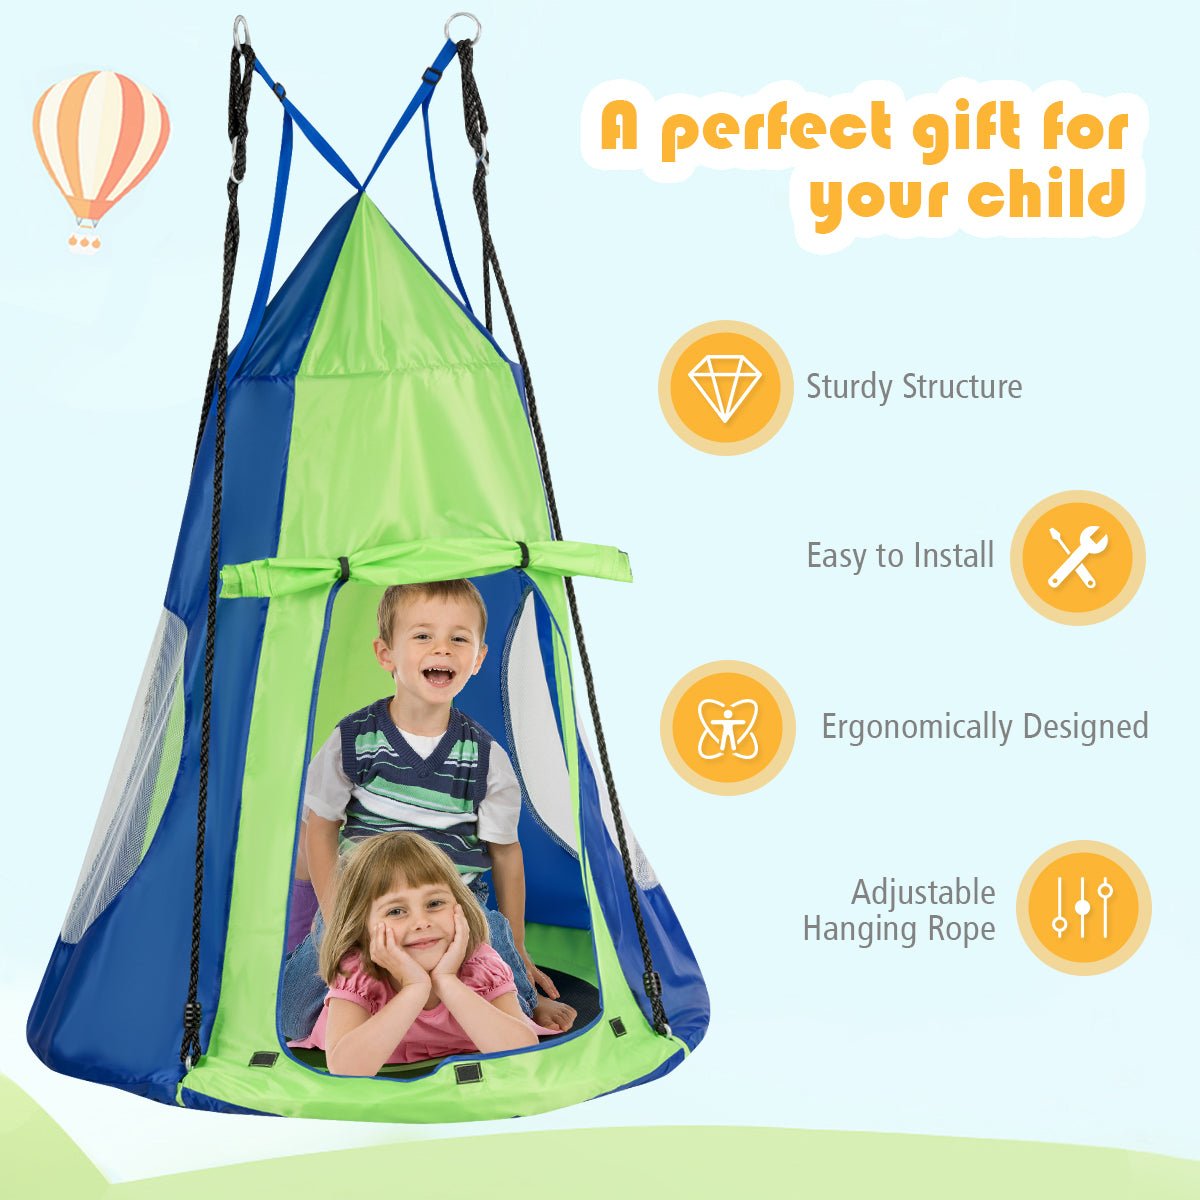 Swing, Play, and Explore with Our Tree Tent Swing Set